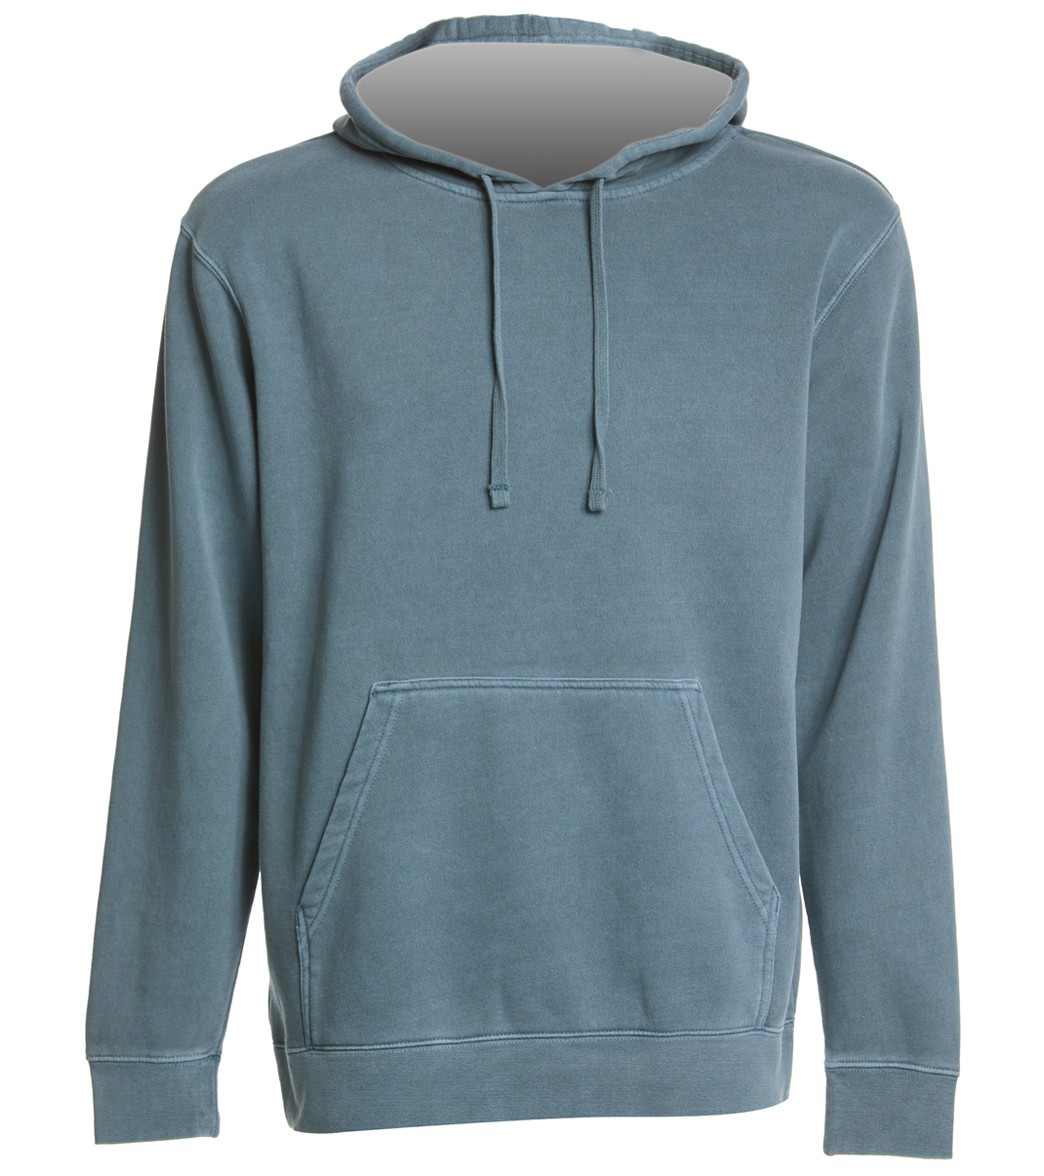 Men's Midweight Pigment Dyed Hooded Sweatshirt - Slate Blue X-Small Cotton/Polyester - Swimoutlet.com